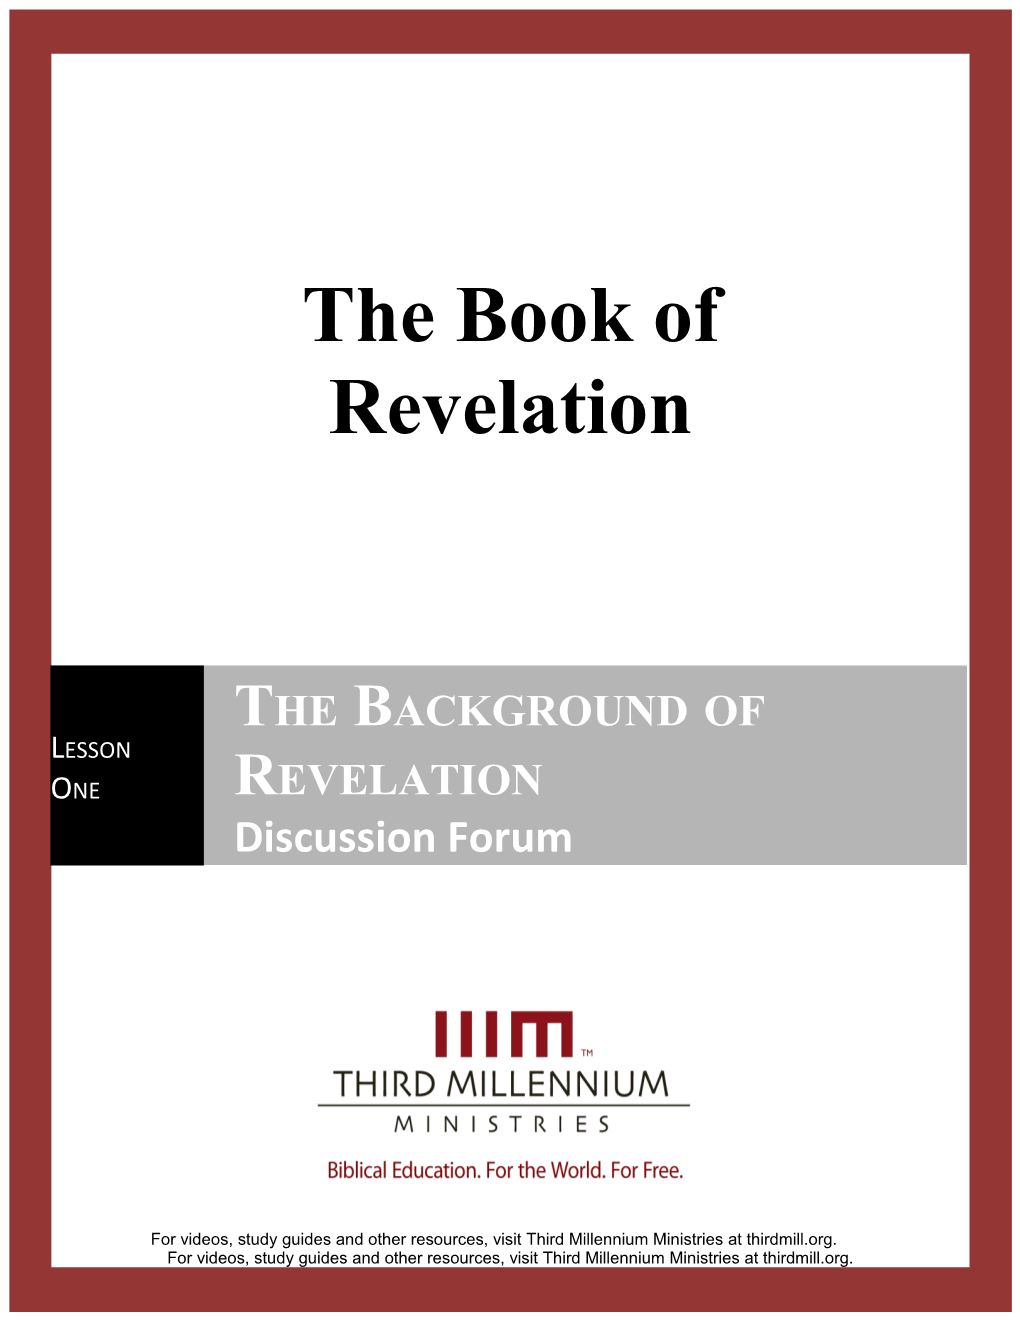 The Book of Revelation - Discussion Forum